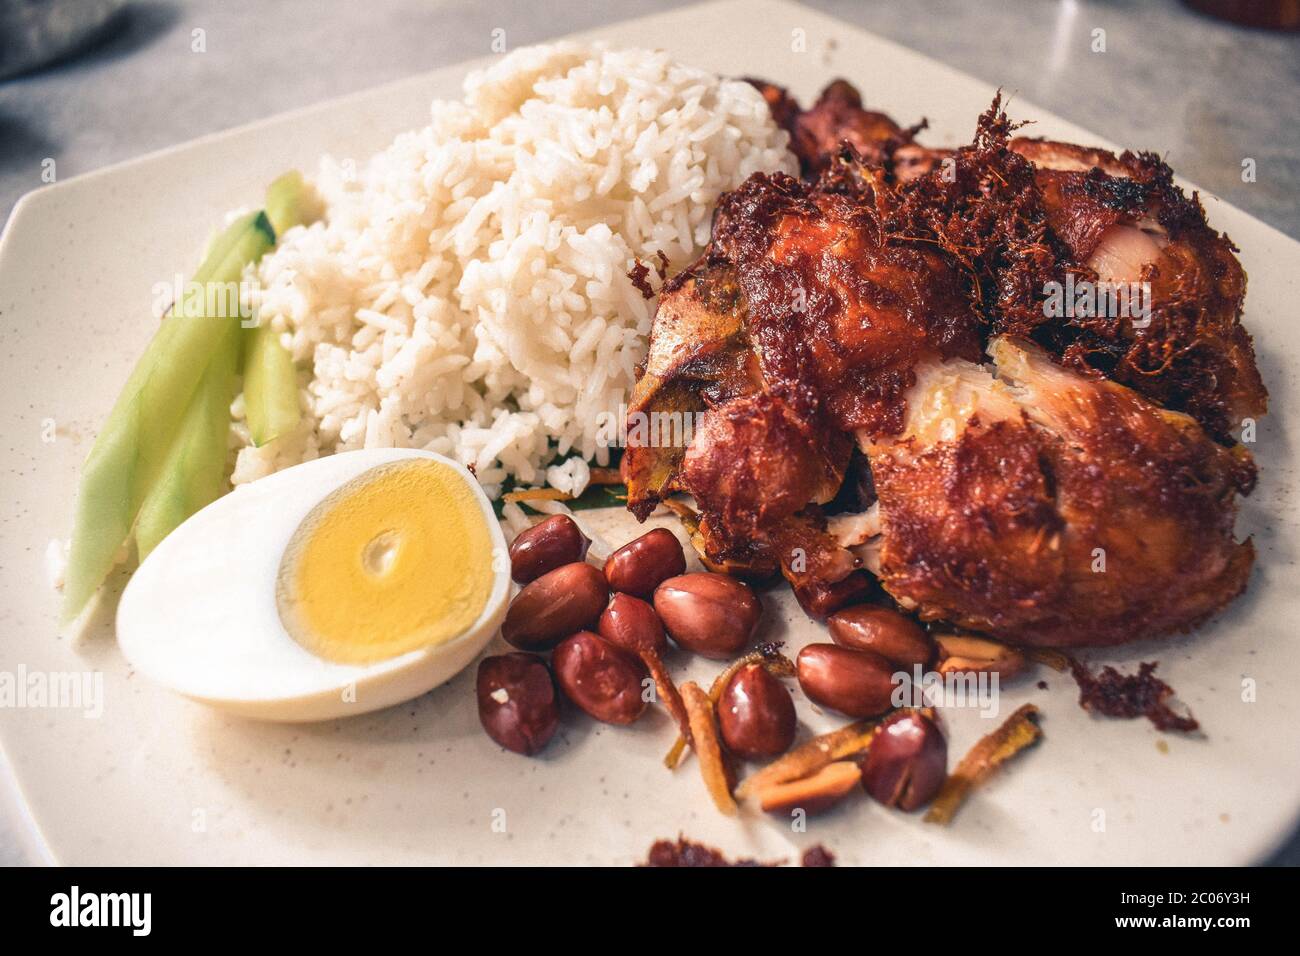 Malaysian spicy chicken with egg and peanut dish Stock Photo